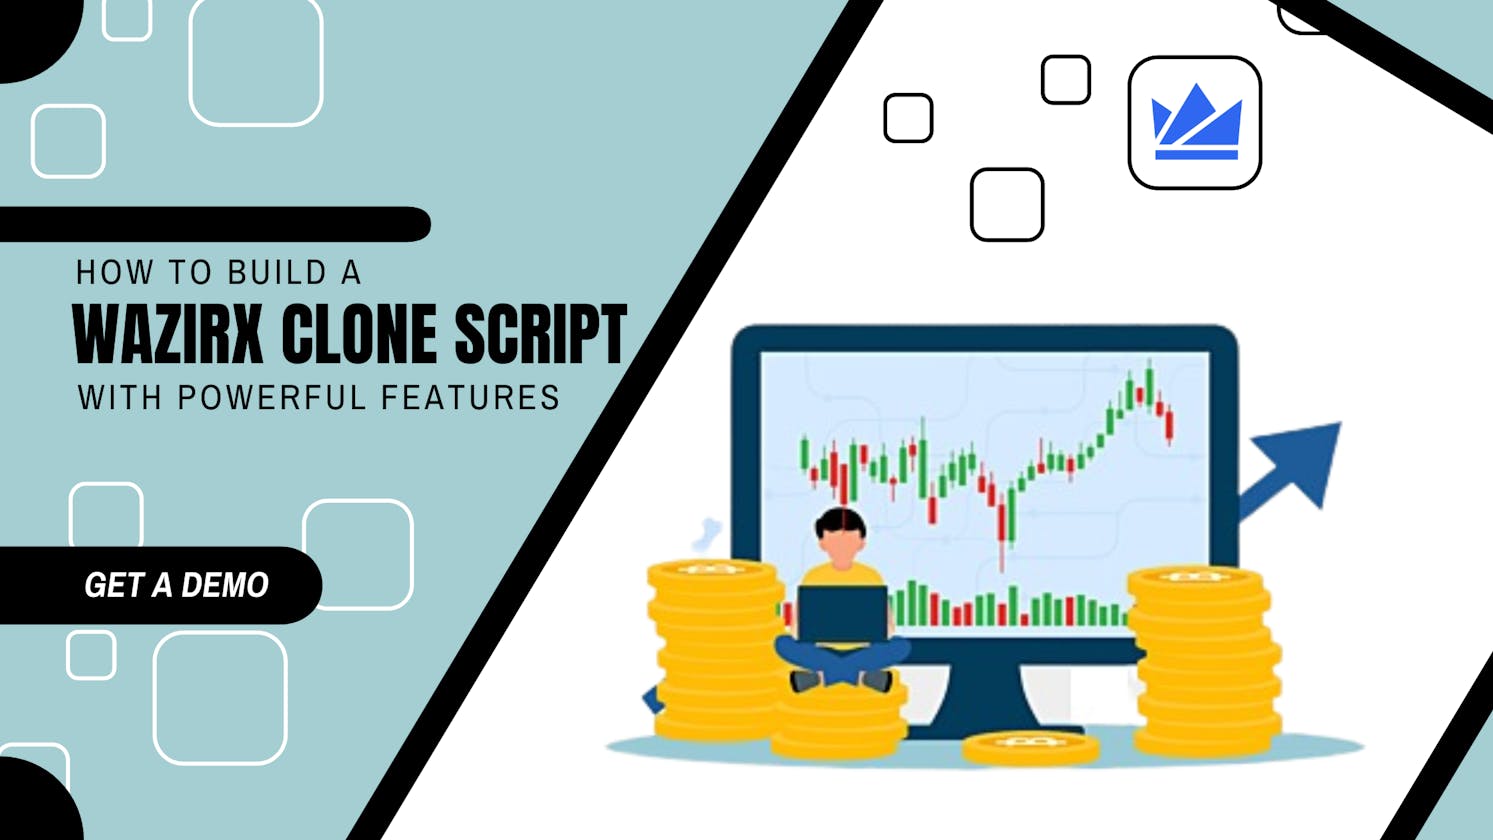 How to Build a WazirX Clone Script with Powerful Features?